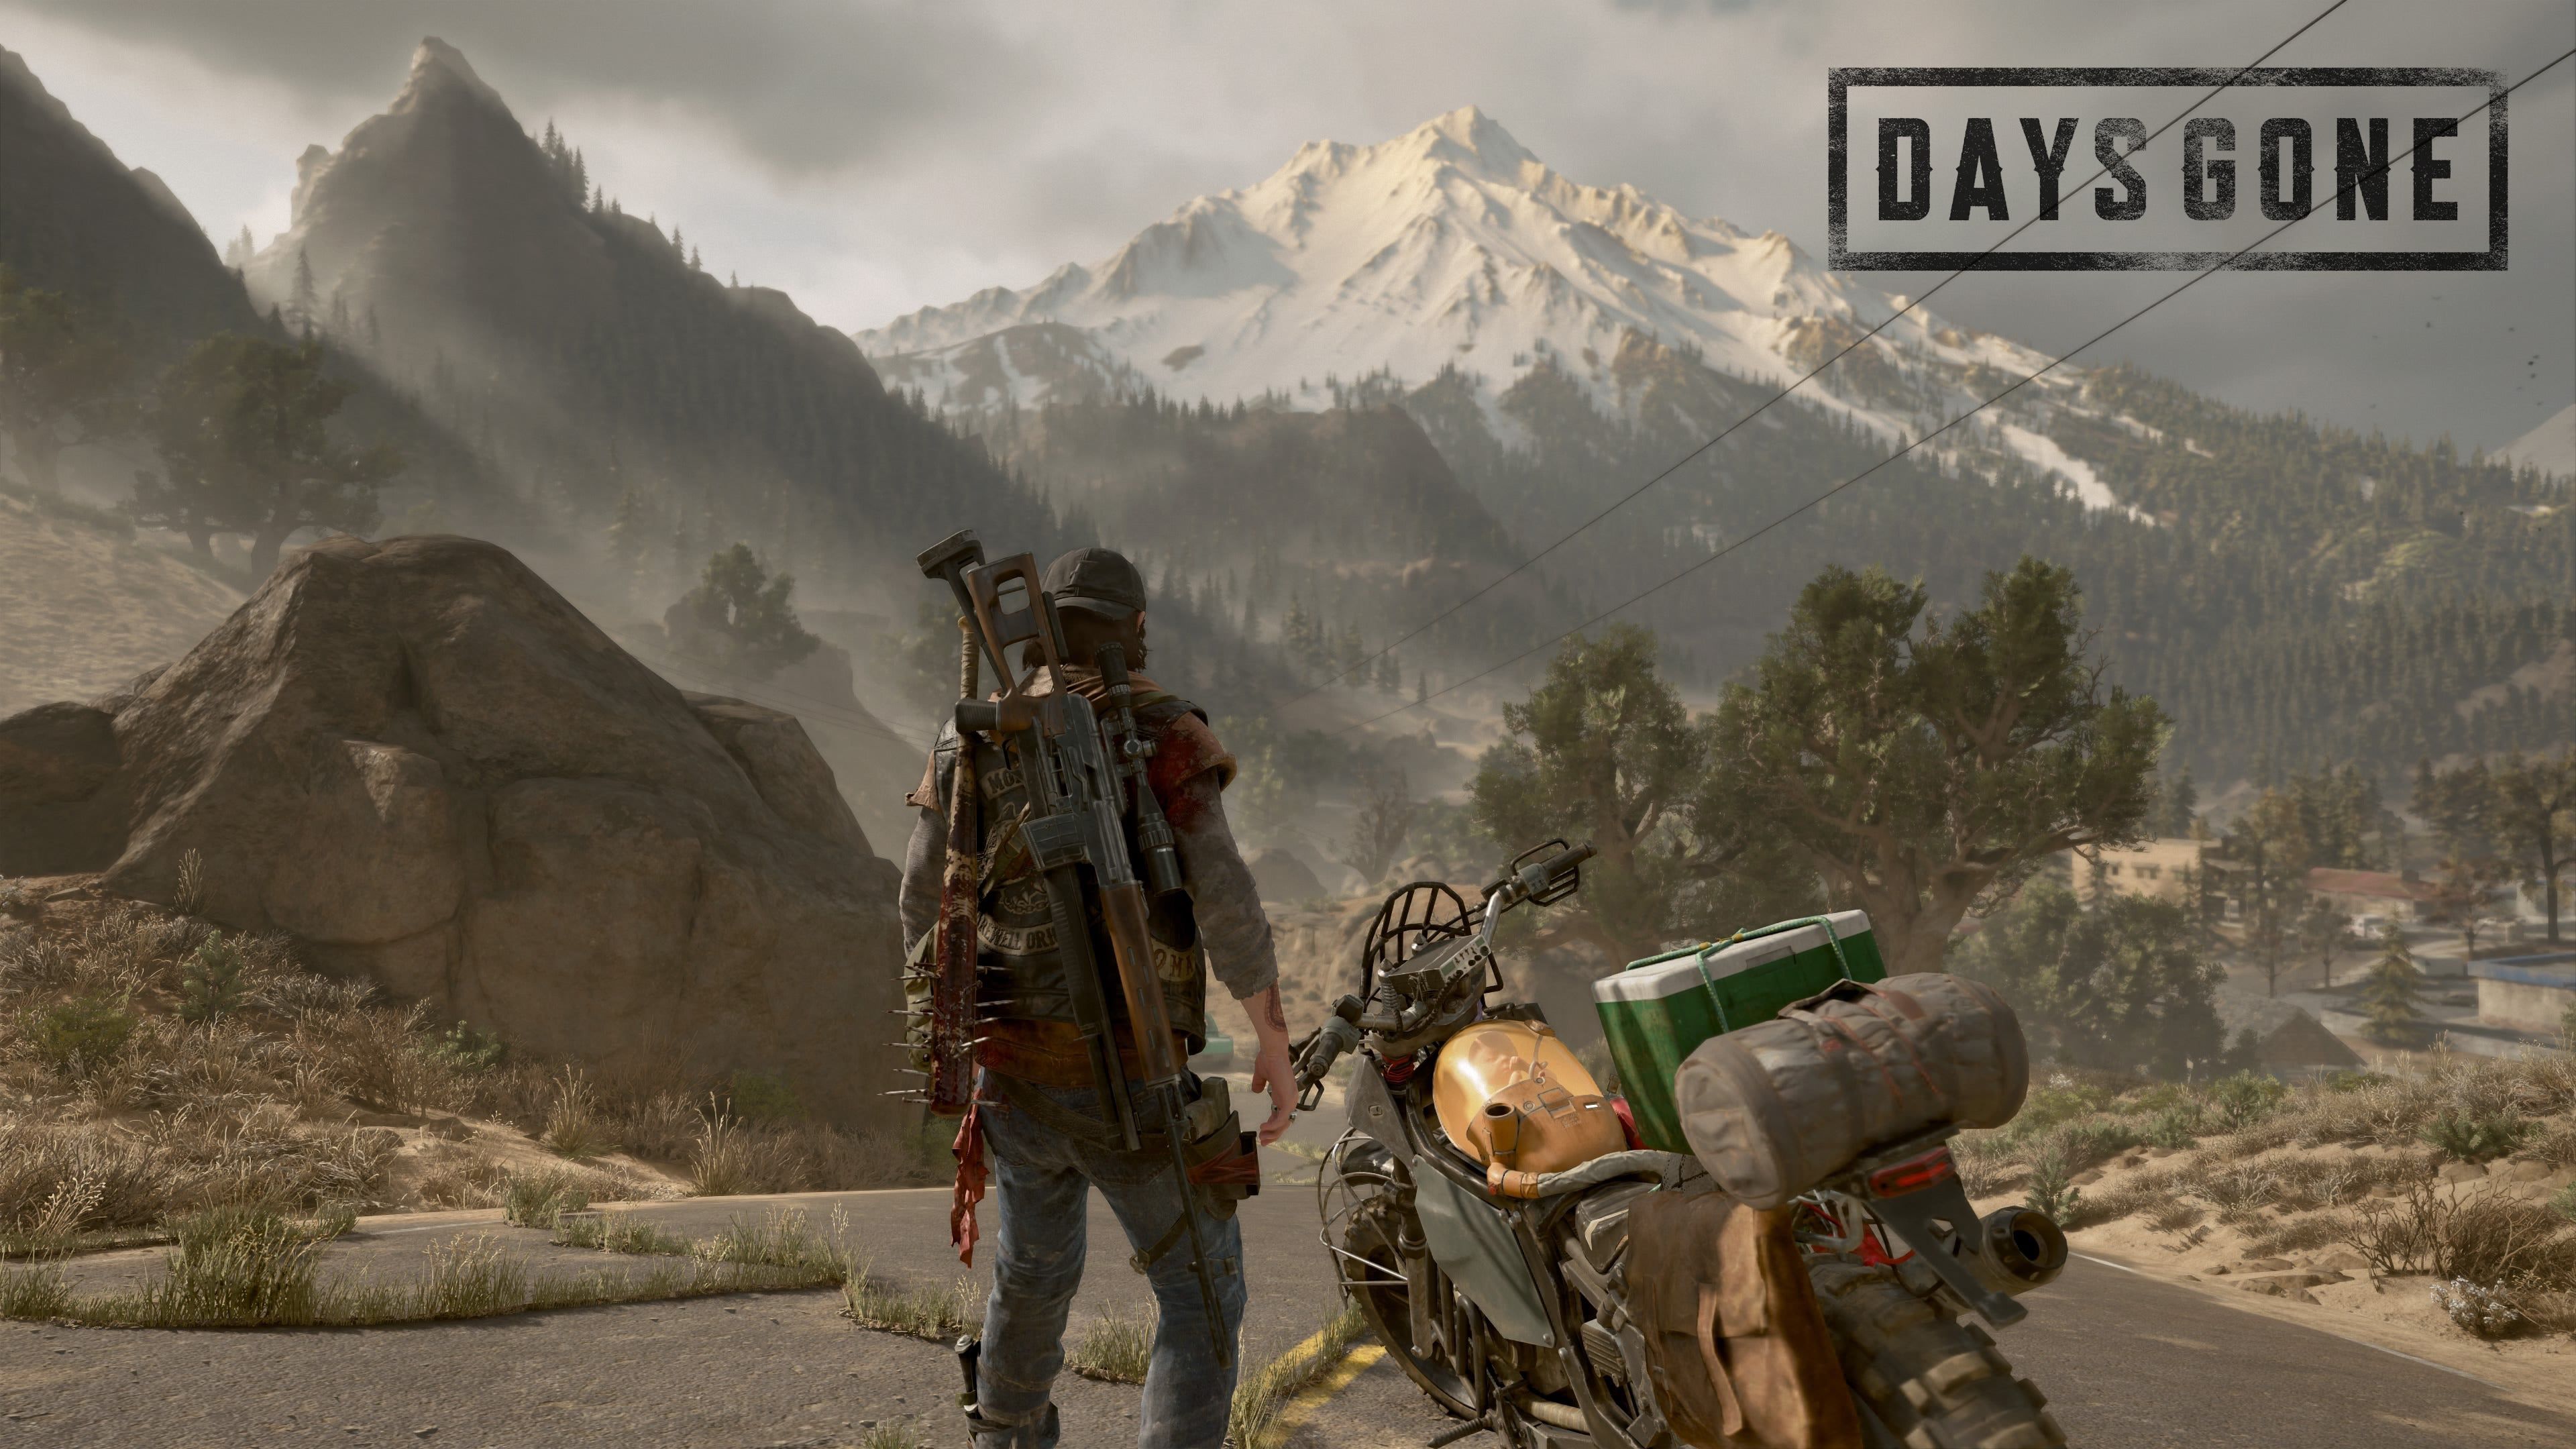 Days Gone PC 4k Wallpapers - Wallpaper Cave